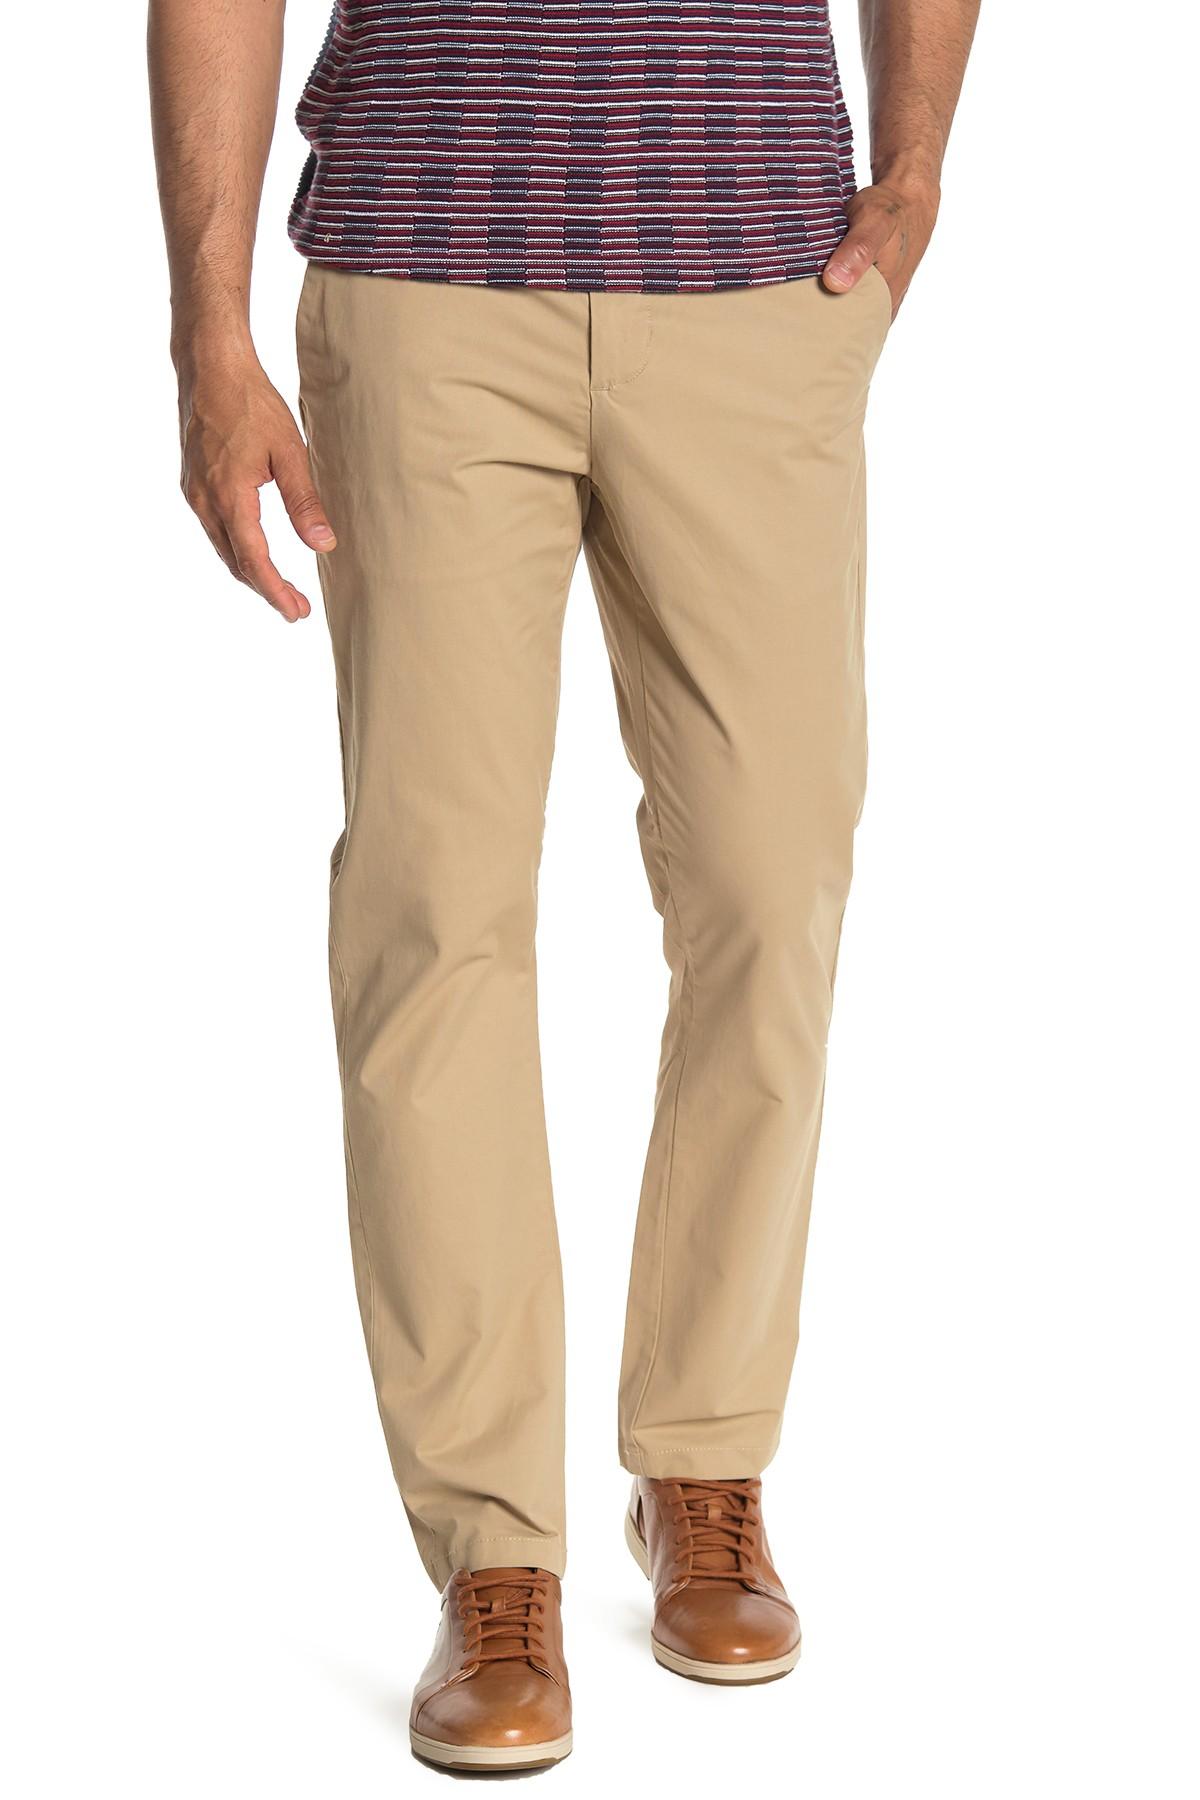 English Laundry El Midway Twill Flat Front Pants - 30-32